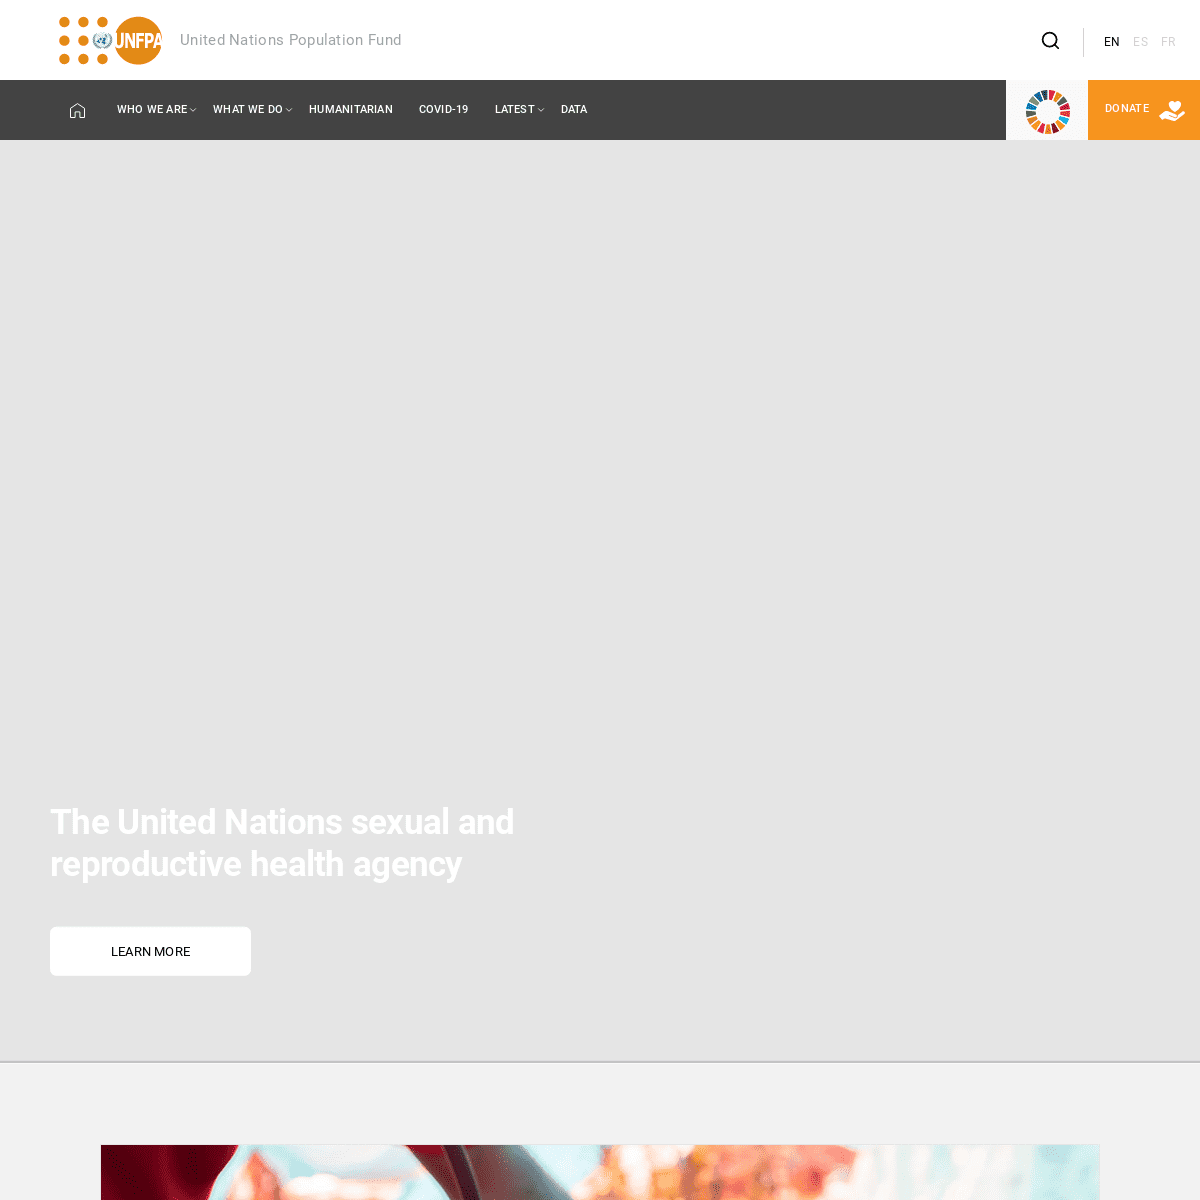 A complete backup of https://unfpa.org